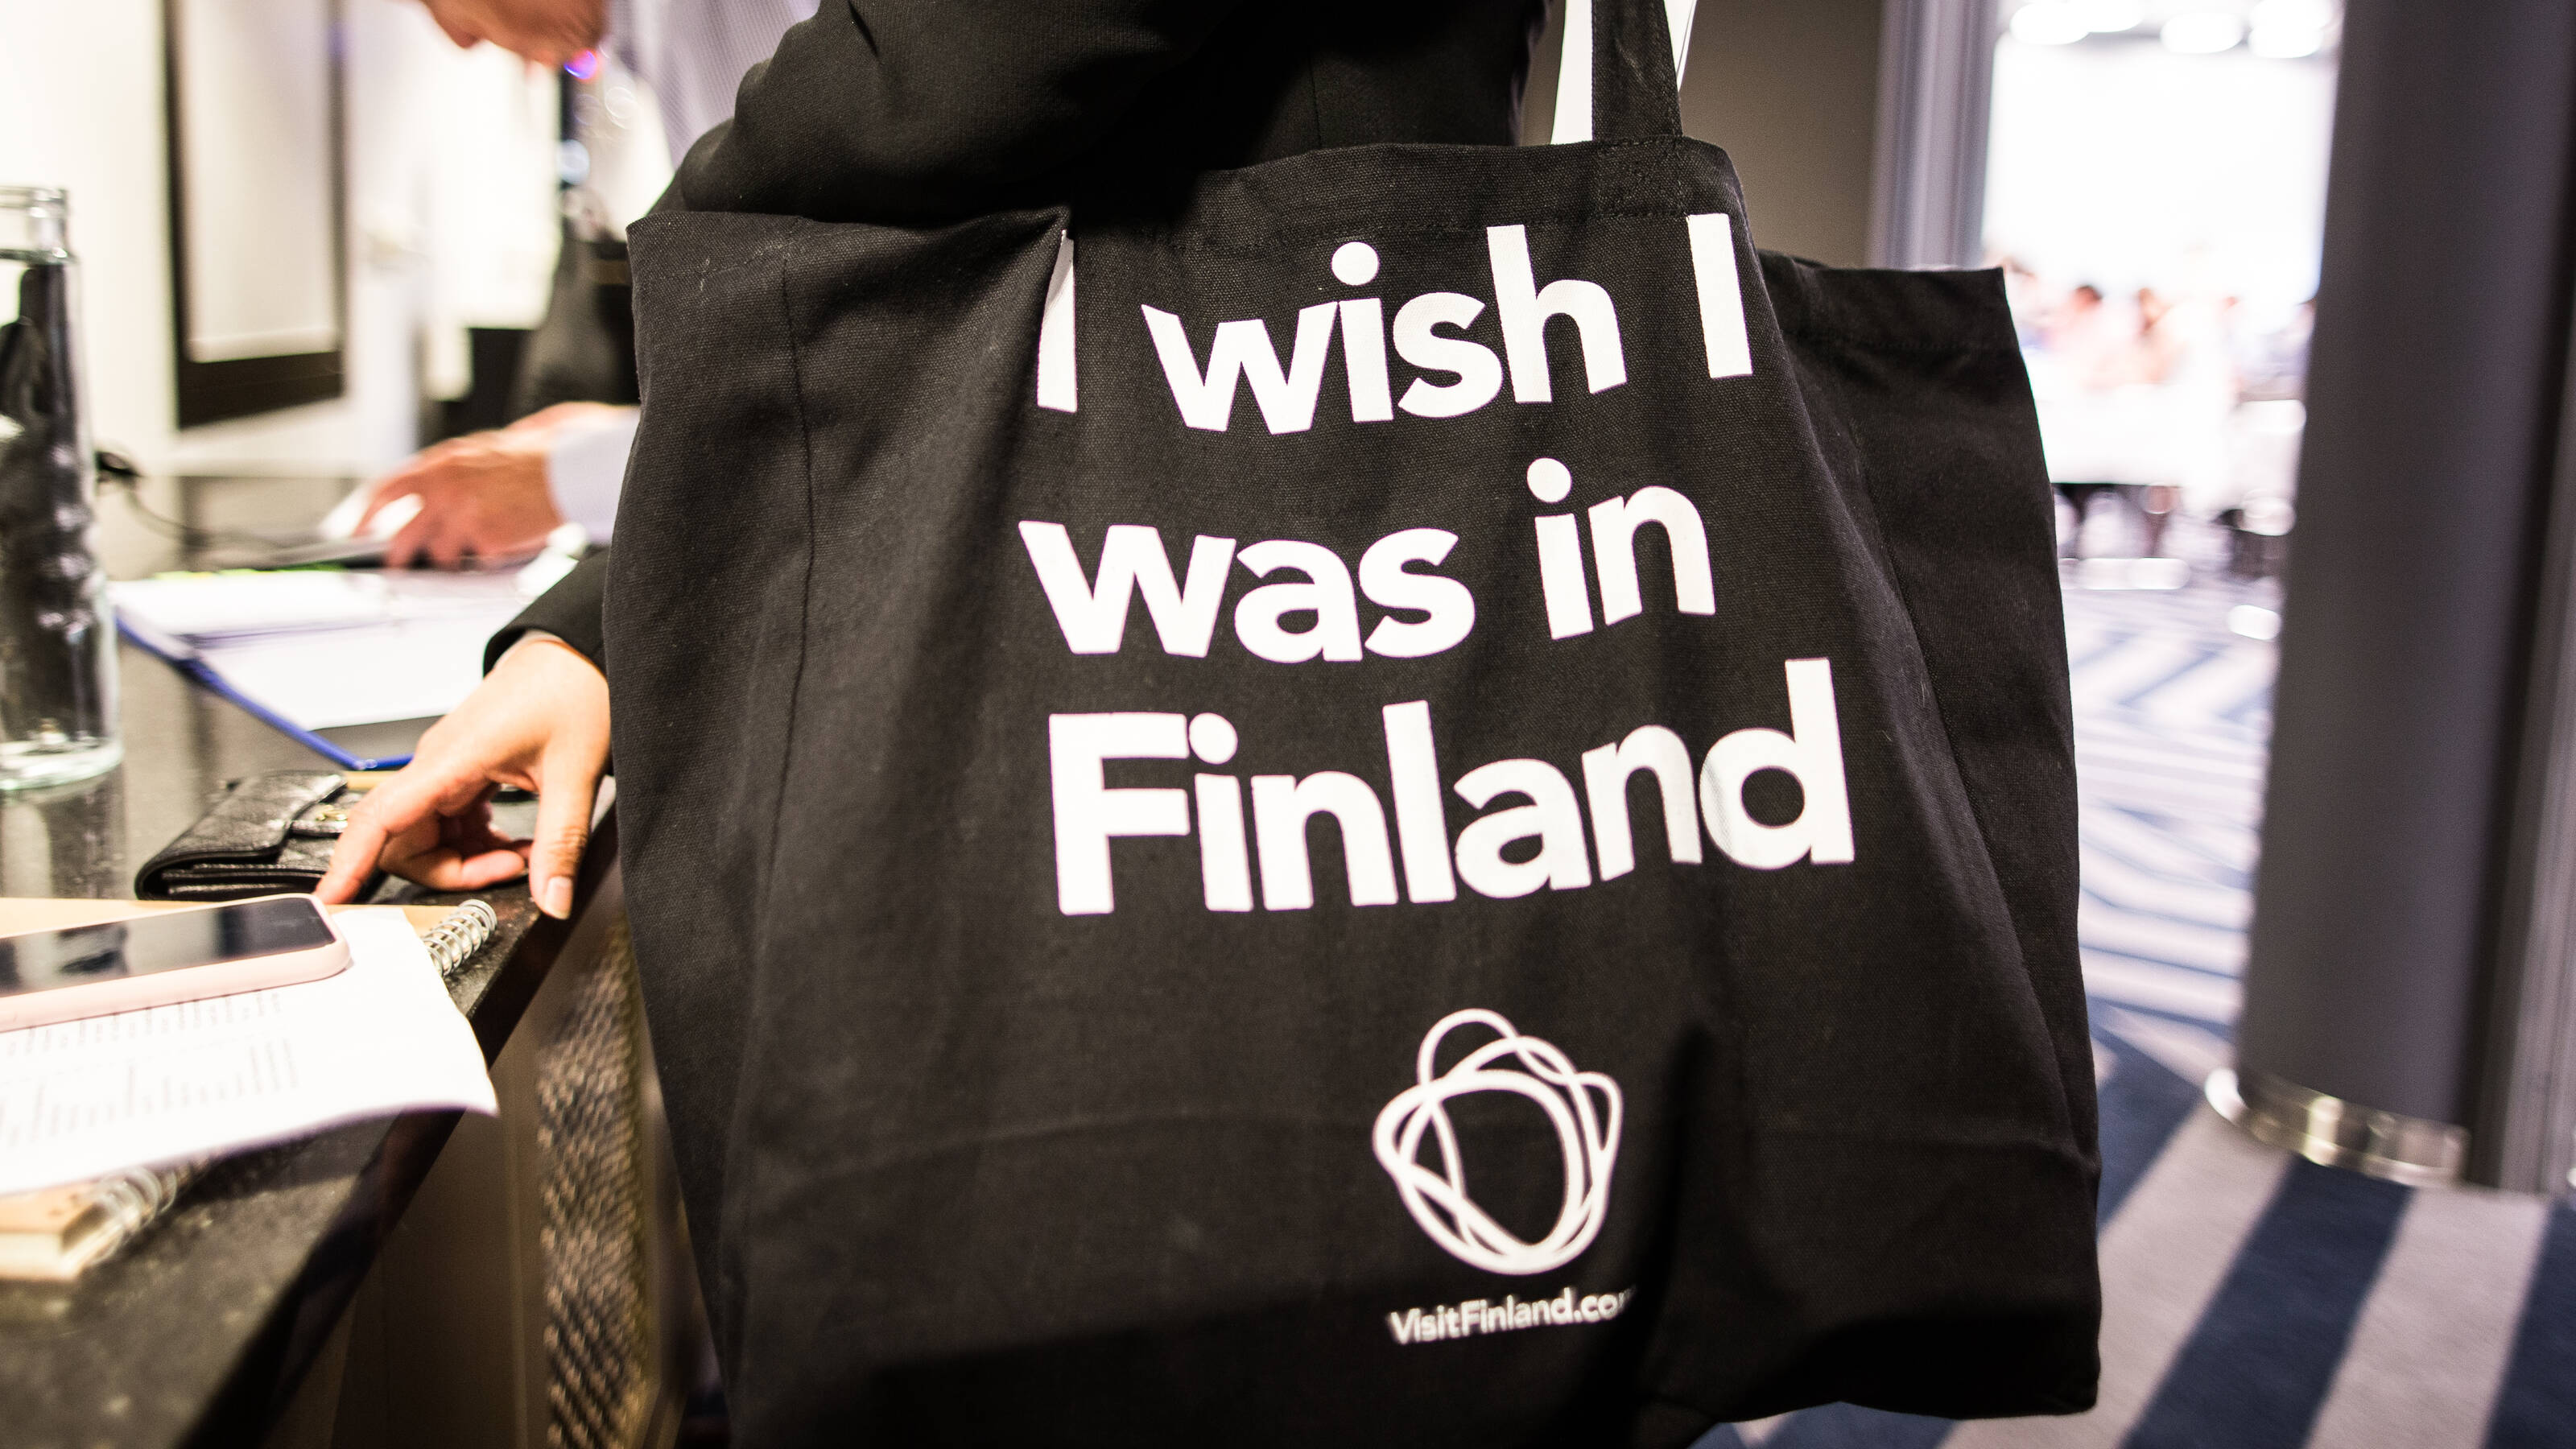 View of a black tote bag with the text "I wish I was in Finland" and Visit Finland logotype.